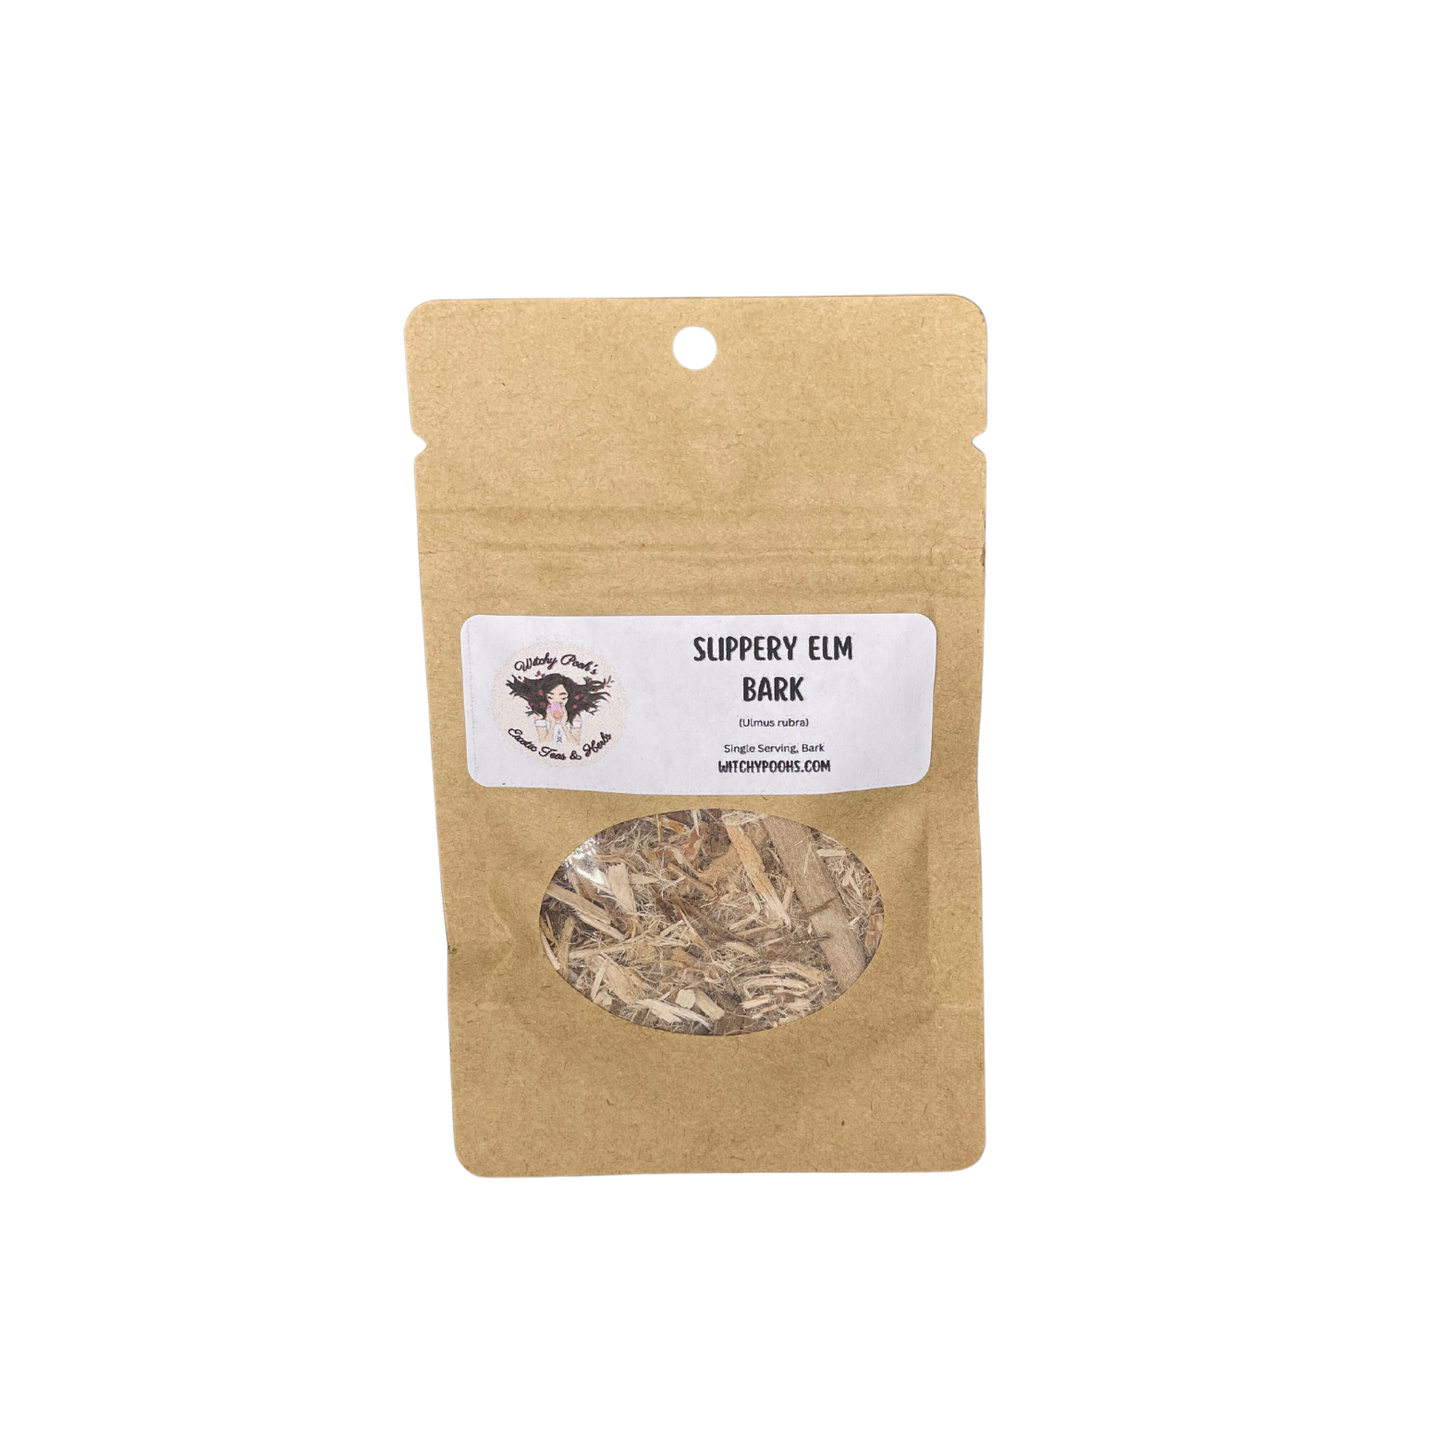 Witchy Pooh's Slippery Elm Bark For Ritual to Stop Rumor Spreading-6